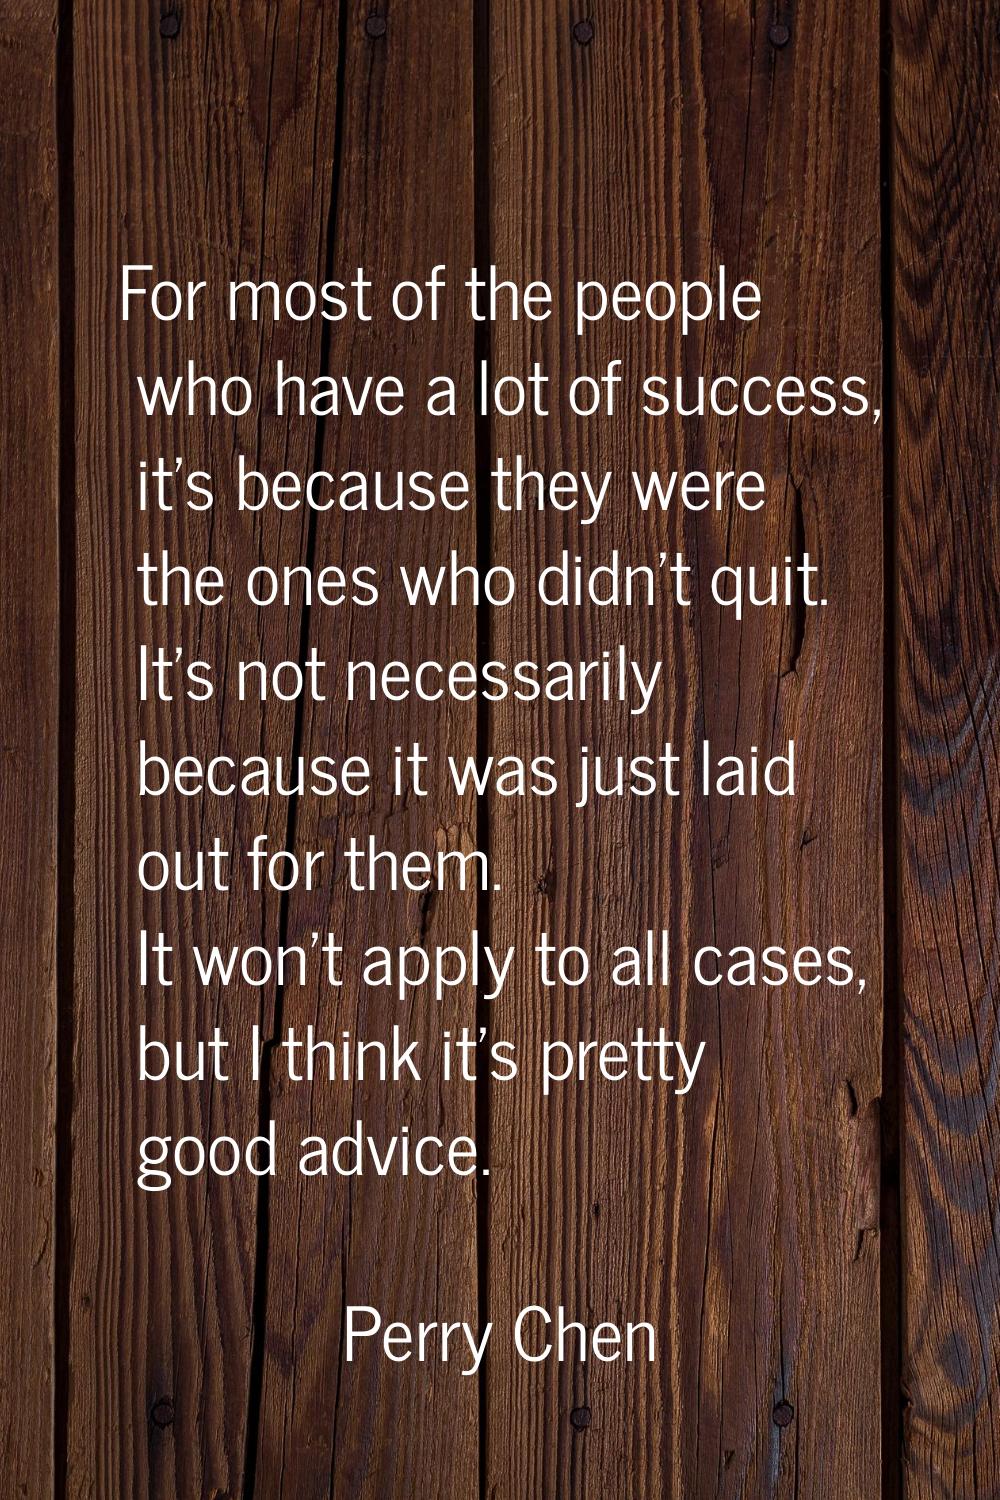 For most of the people who have a lot of success, it's because they were the ones who didn't quit. 